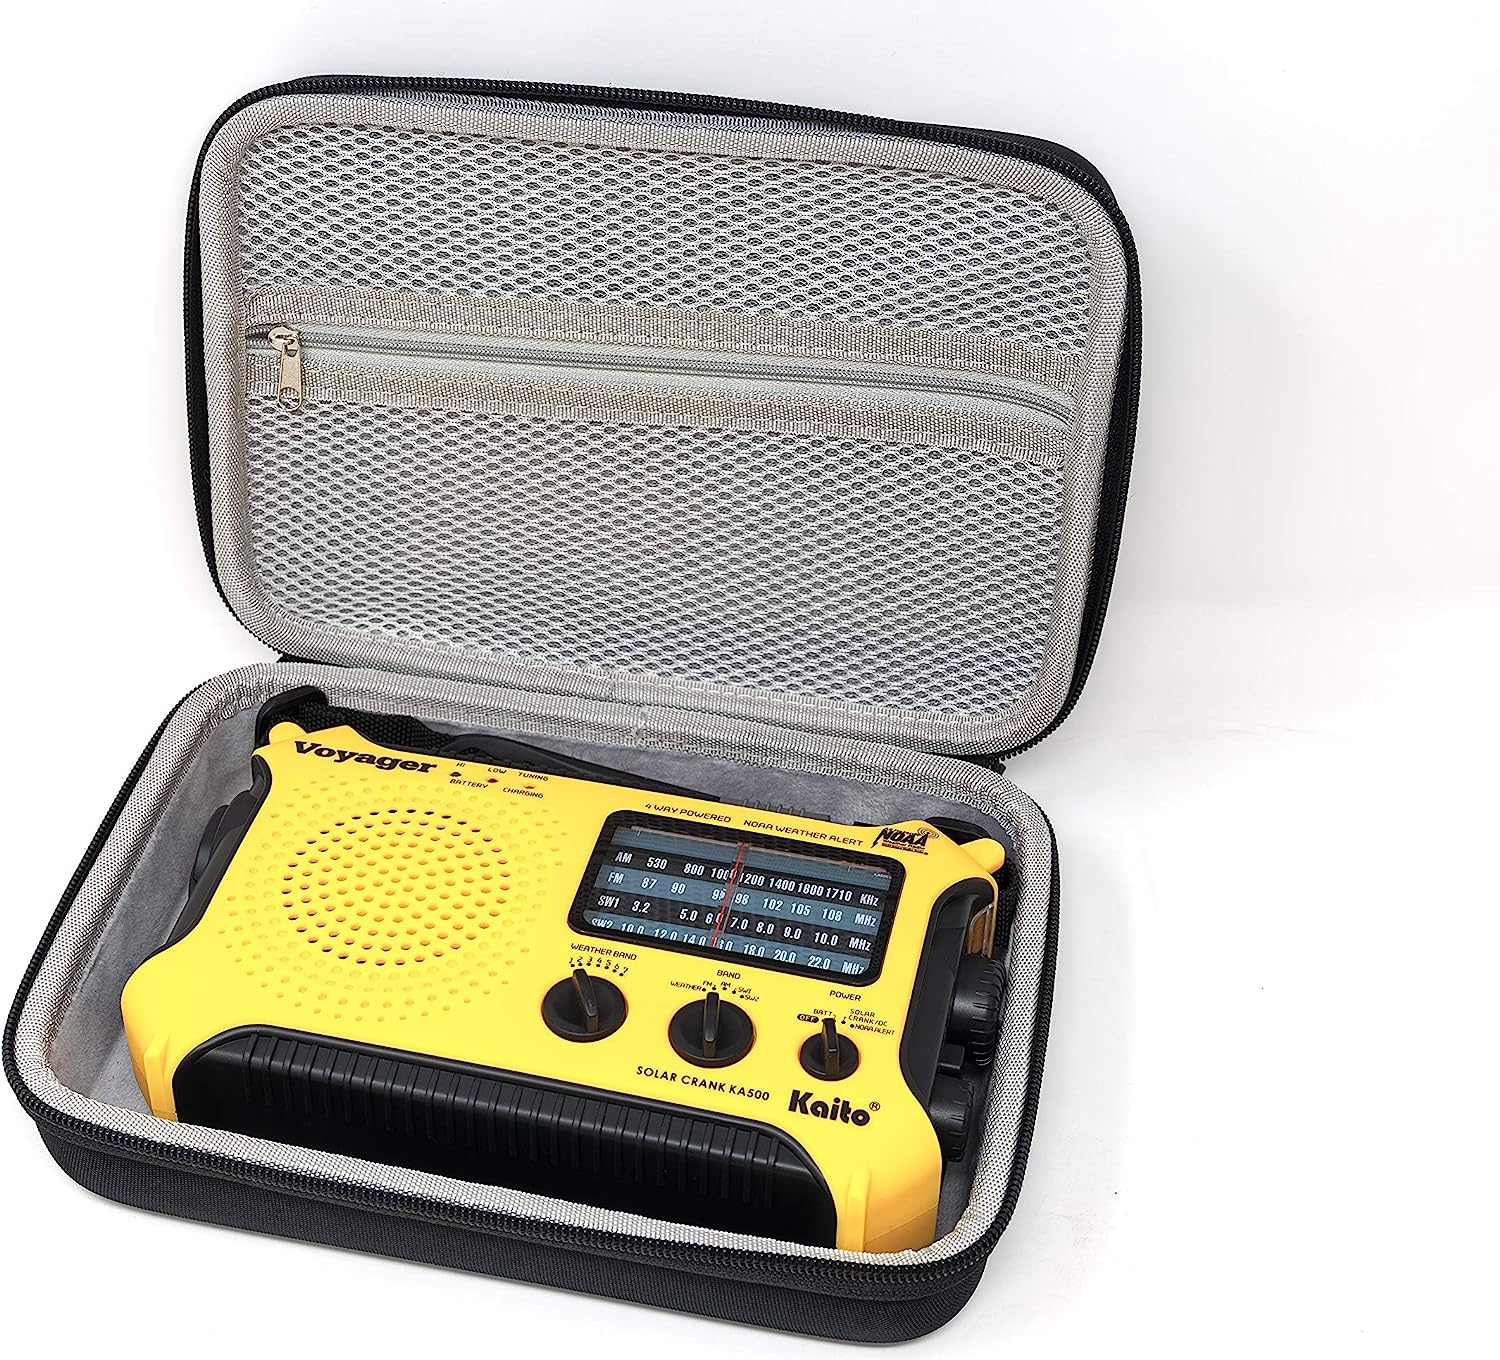 Kaito RC500 EVA Hardshell Storage Case with Dual Zippers and Handles for Voyager KA500 Radio